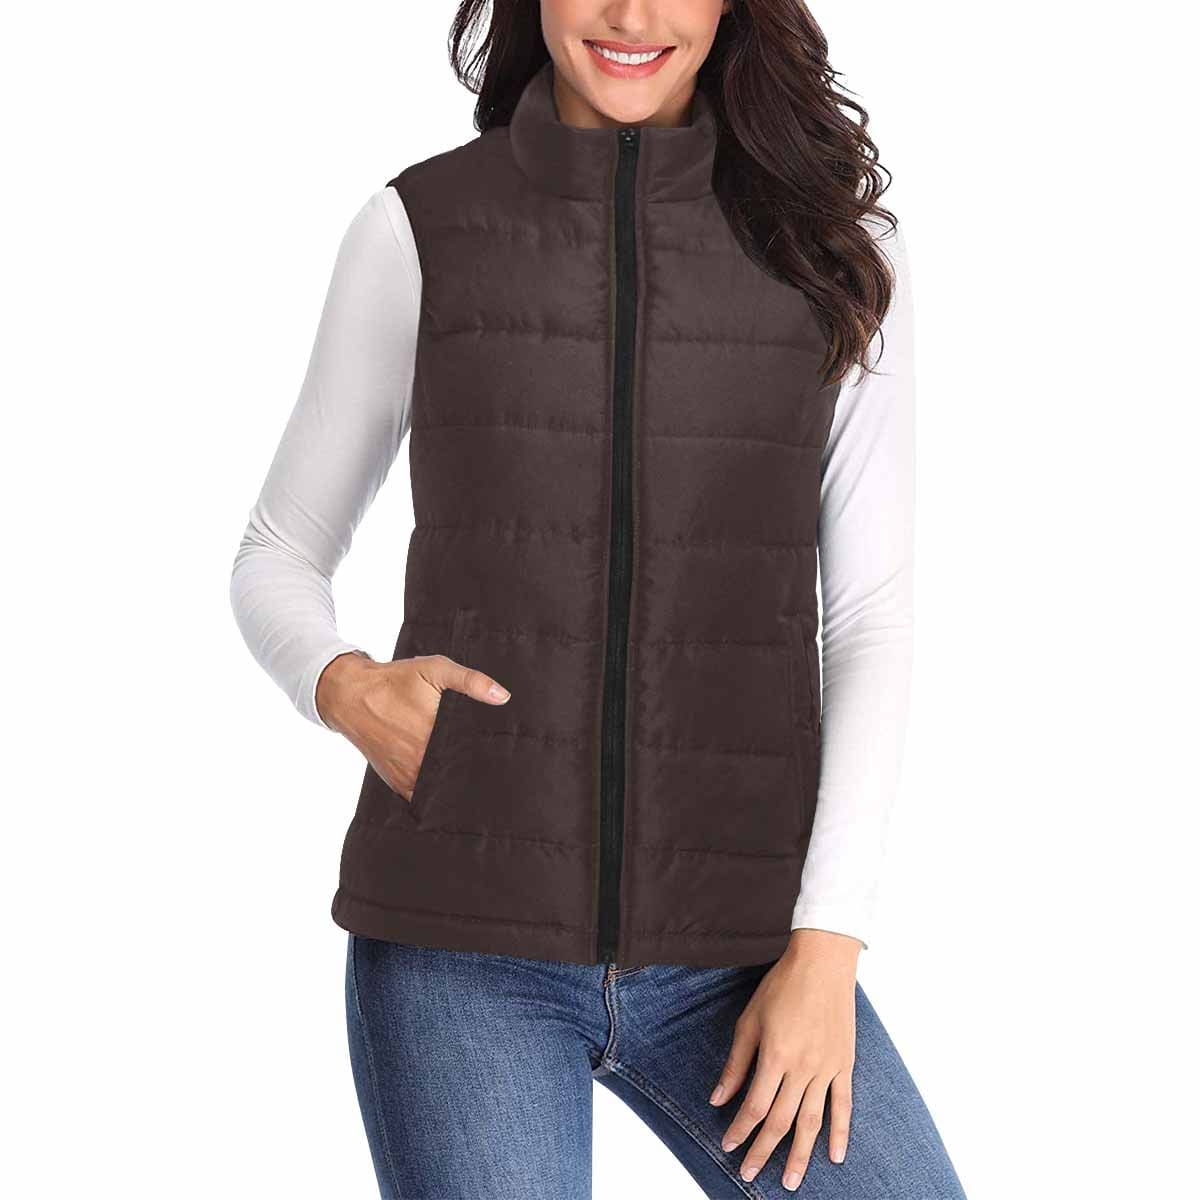 Womens Puffer Vest Jacket / Carafe Brown - Womens | Jackets | Puffer Vests